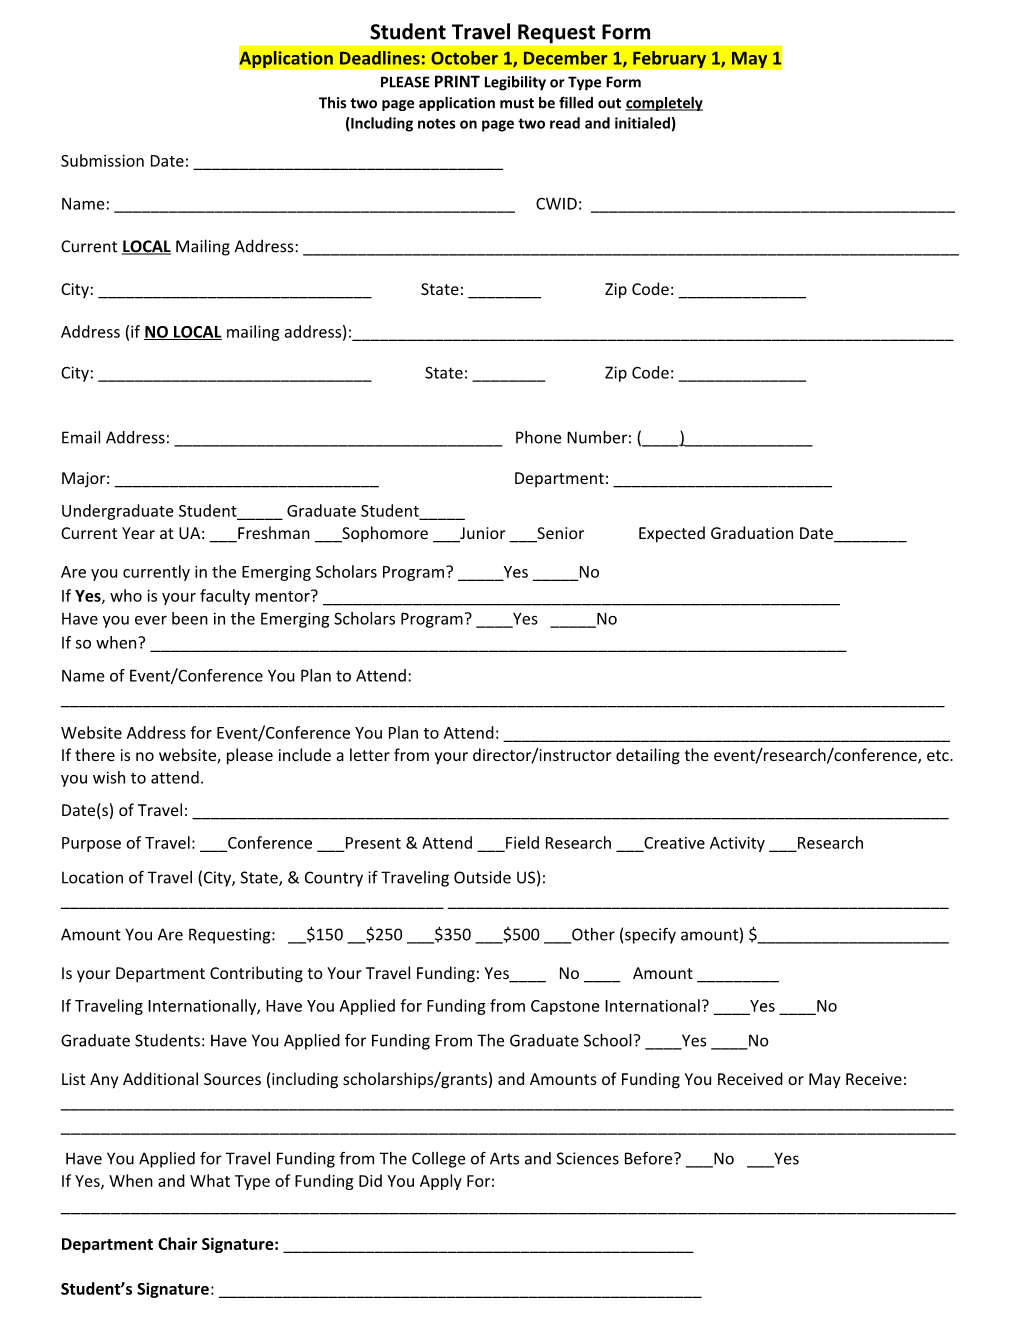 Student Travel Request Form